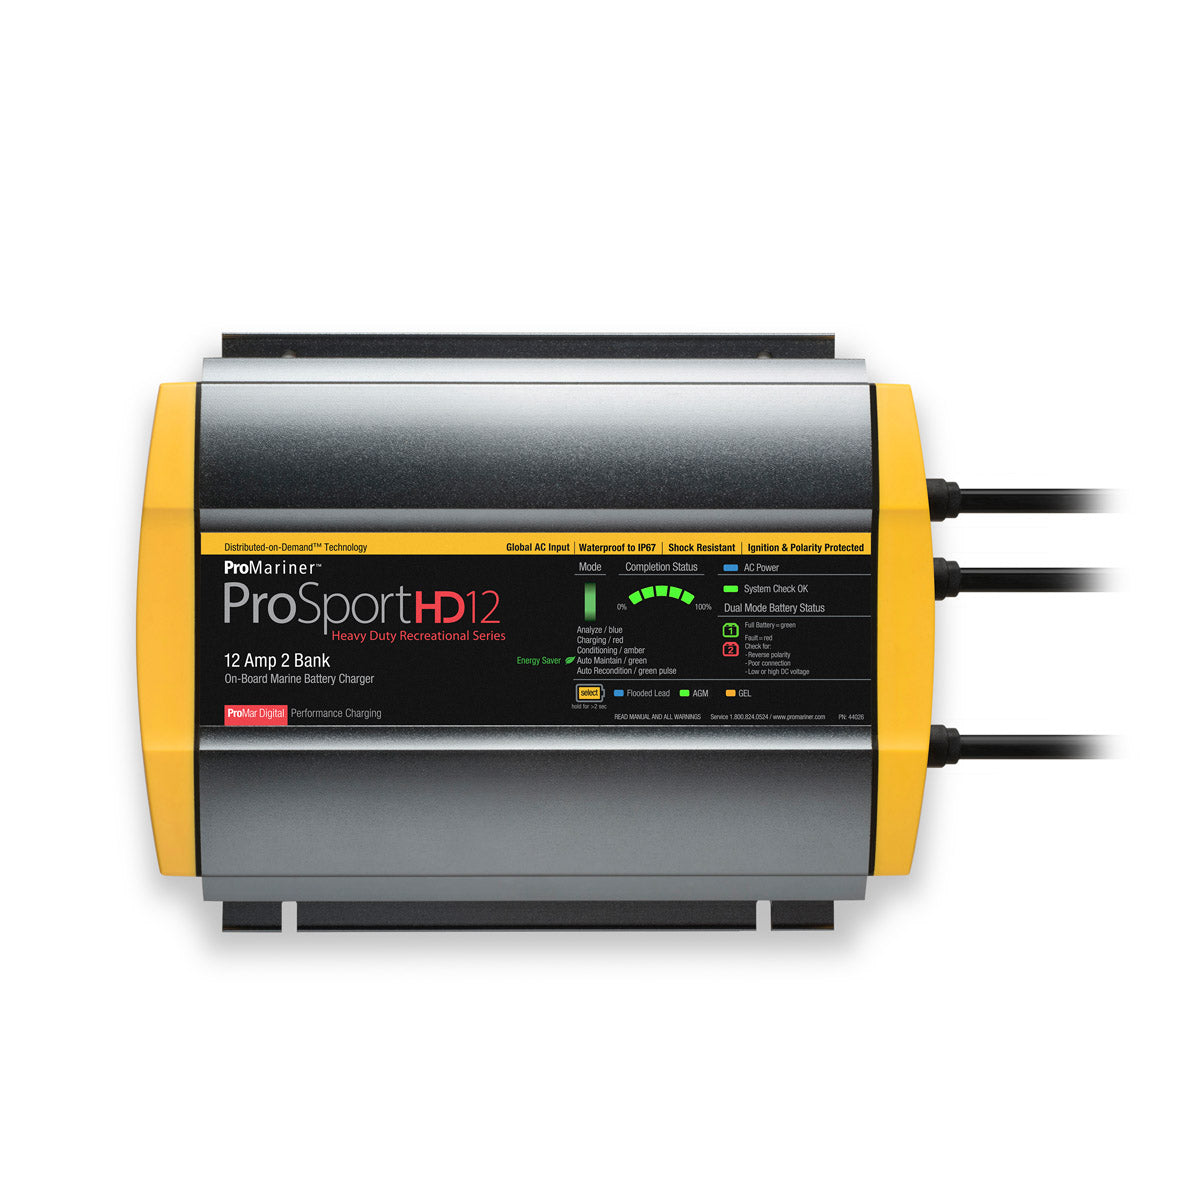 ProMariner™ On-Board Marine Battery Charger – ProSport Series